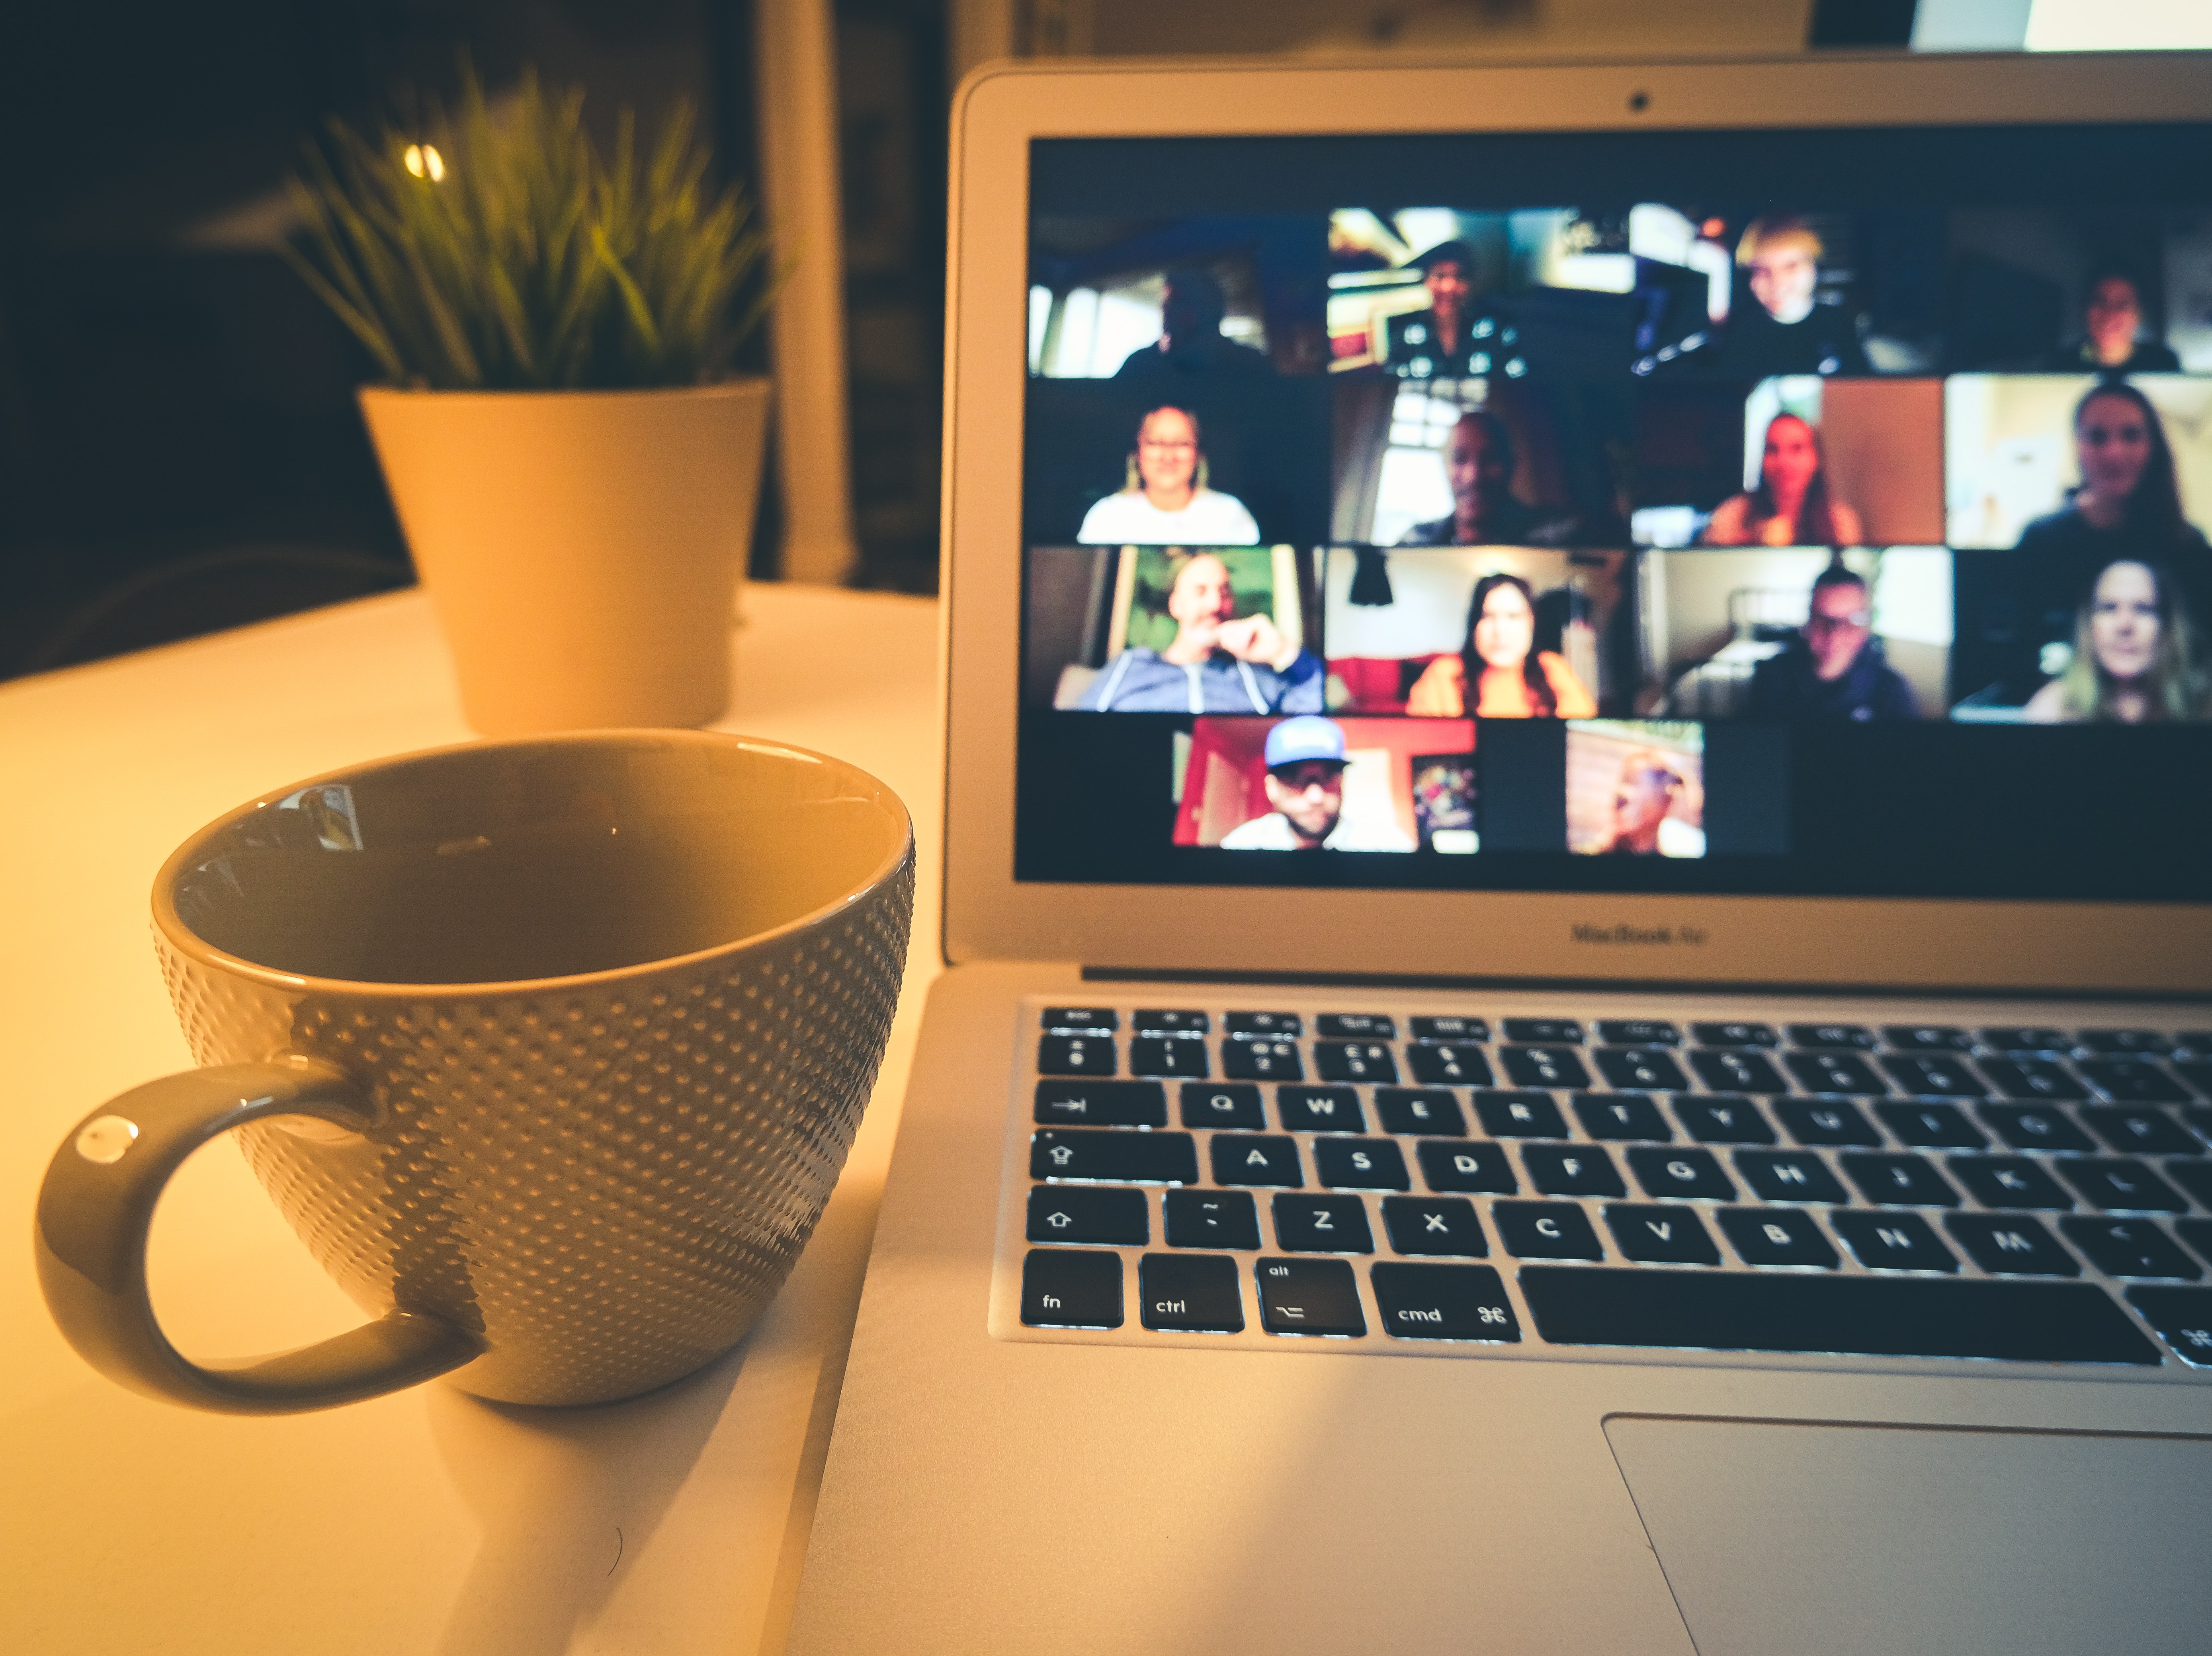 A calming scene of a laptop with several people on video chat and a coffee mug nearby.